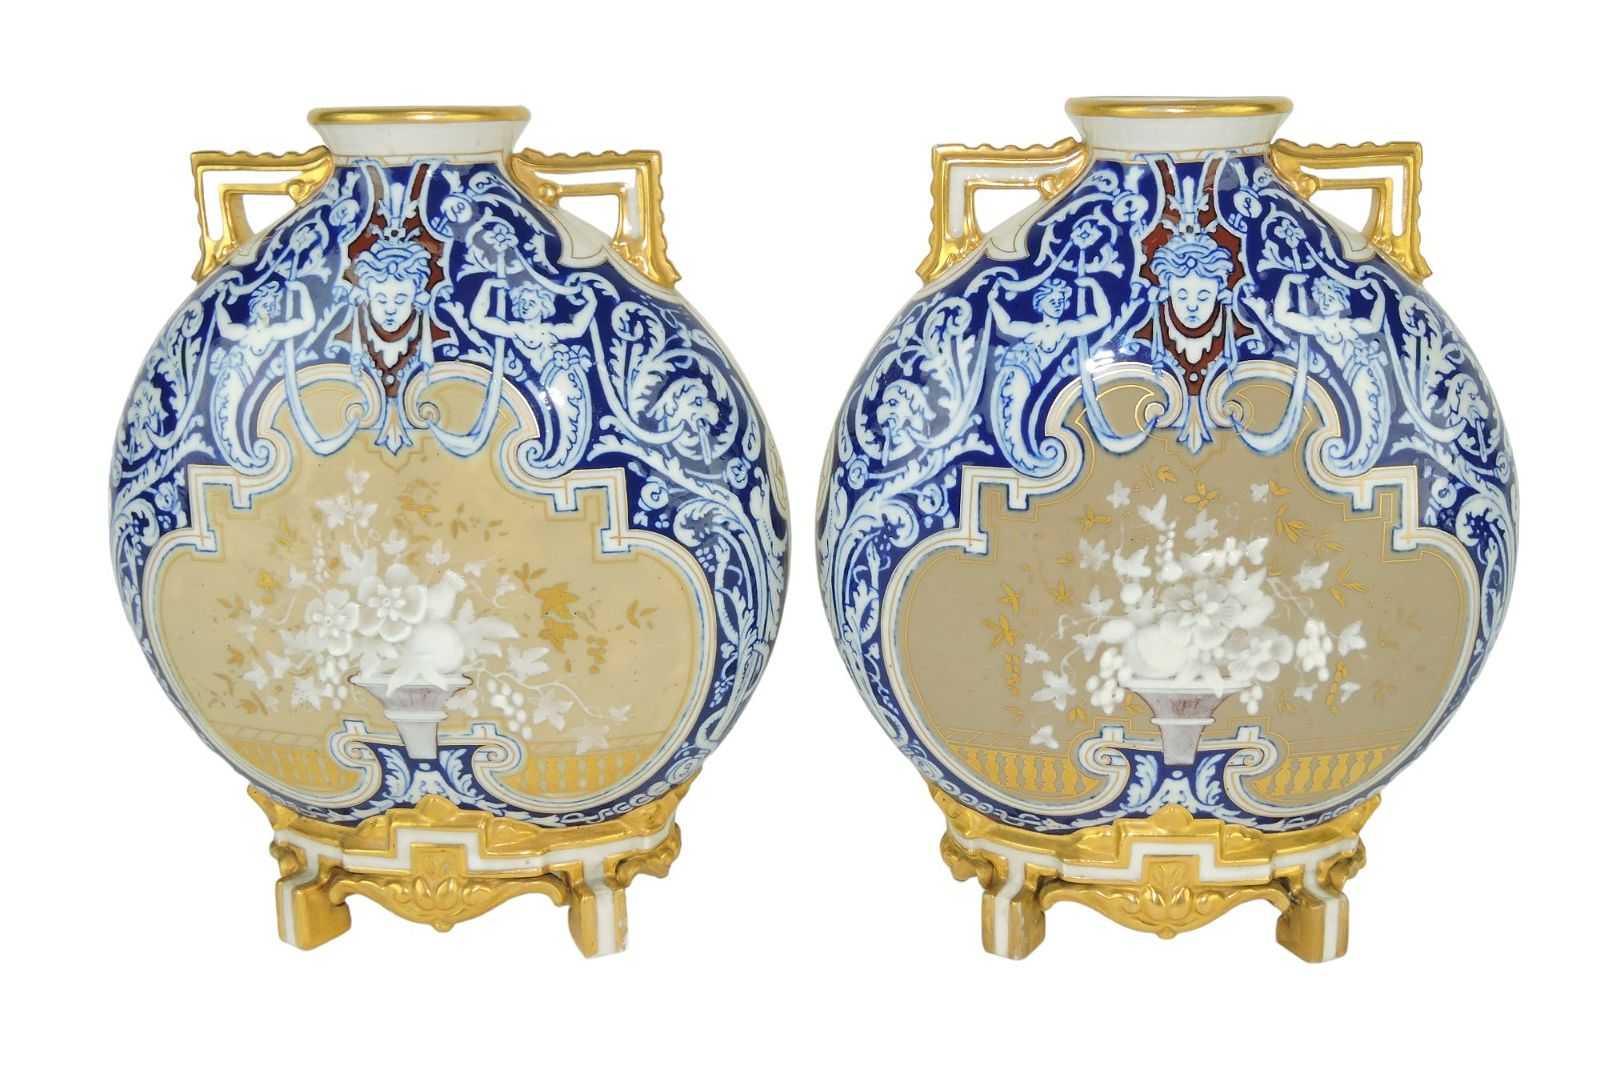 Pair of Royal Worcester Aesthetic movement moon flasks with Renaissance Revival and pate sur pate decoration, estimated at $5,000-$7,000 at Strawser Auction Group.
 
